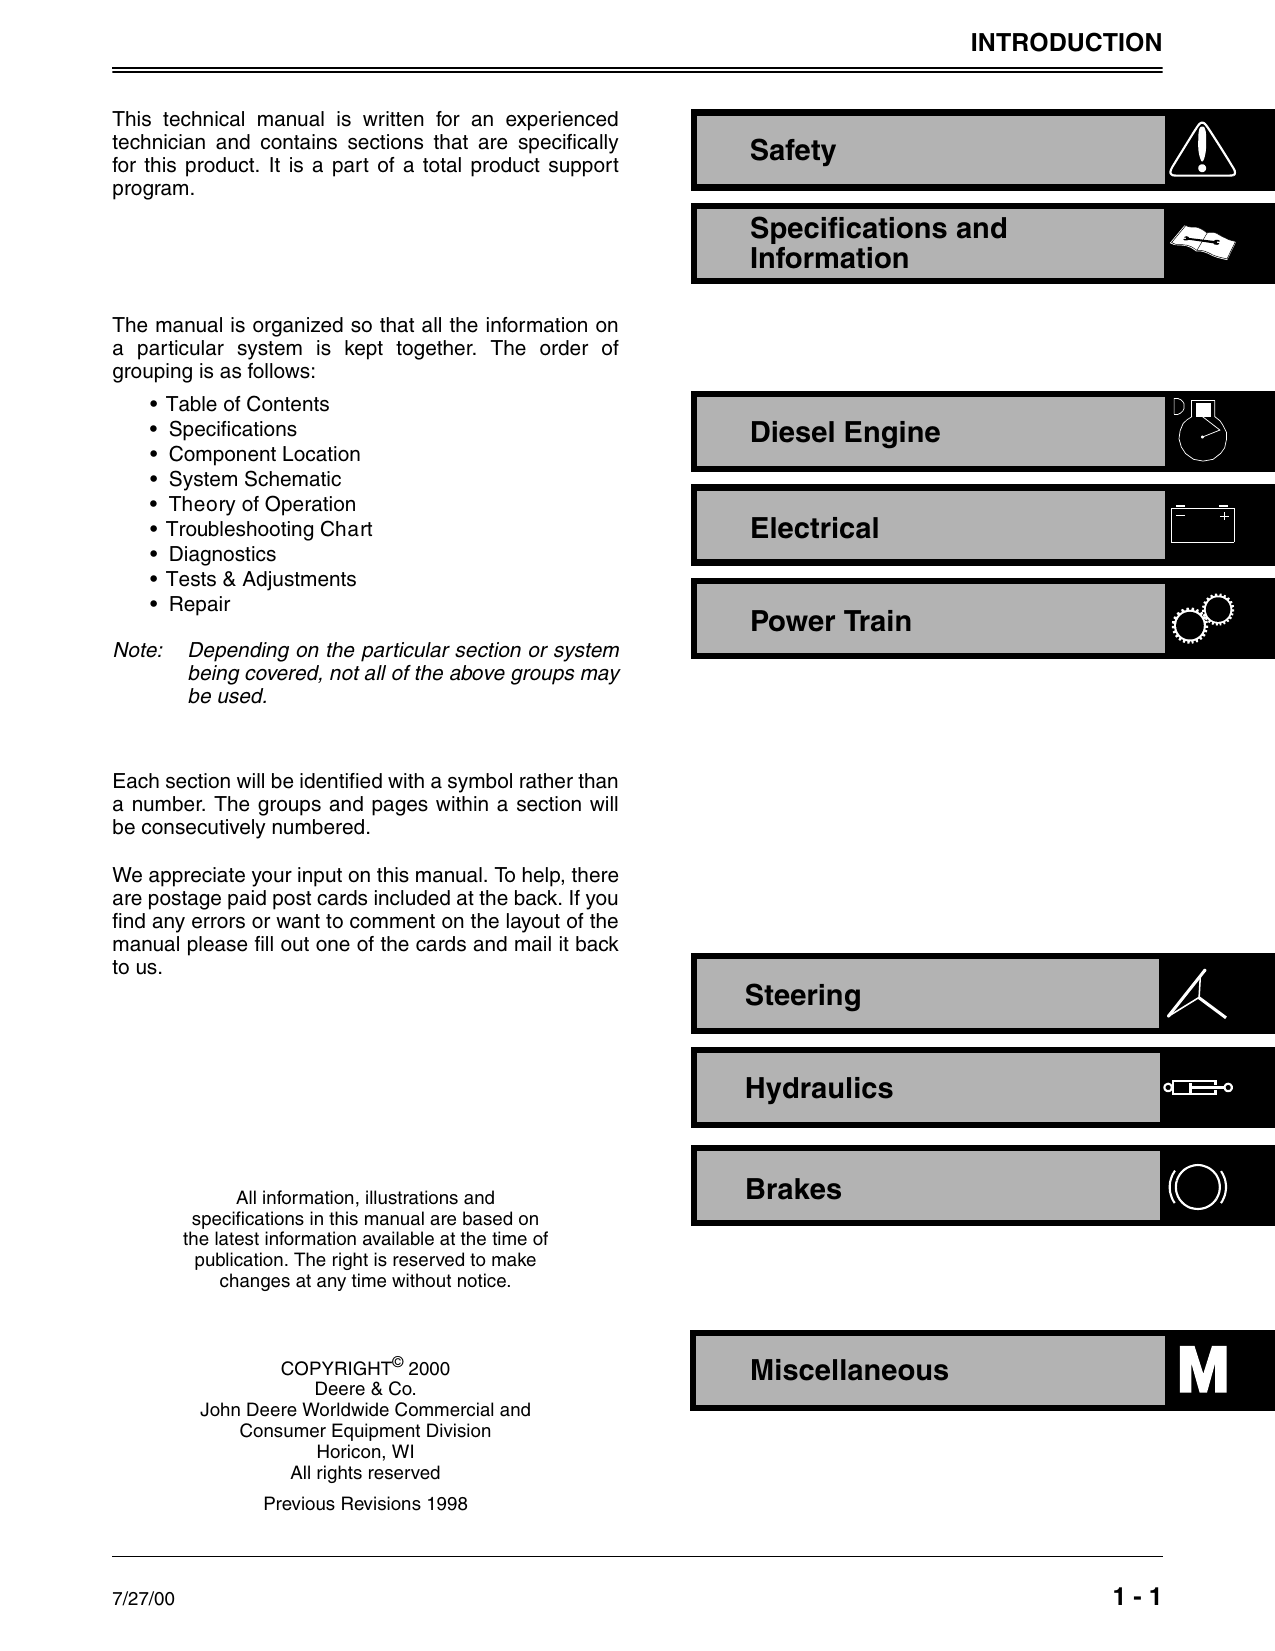 John Deere 990 compact utility tractor technical manual Preview image 3